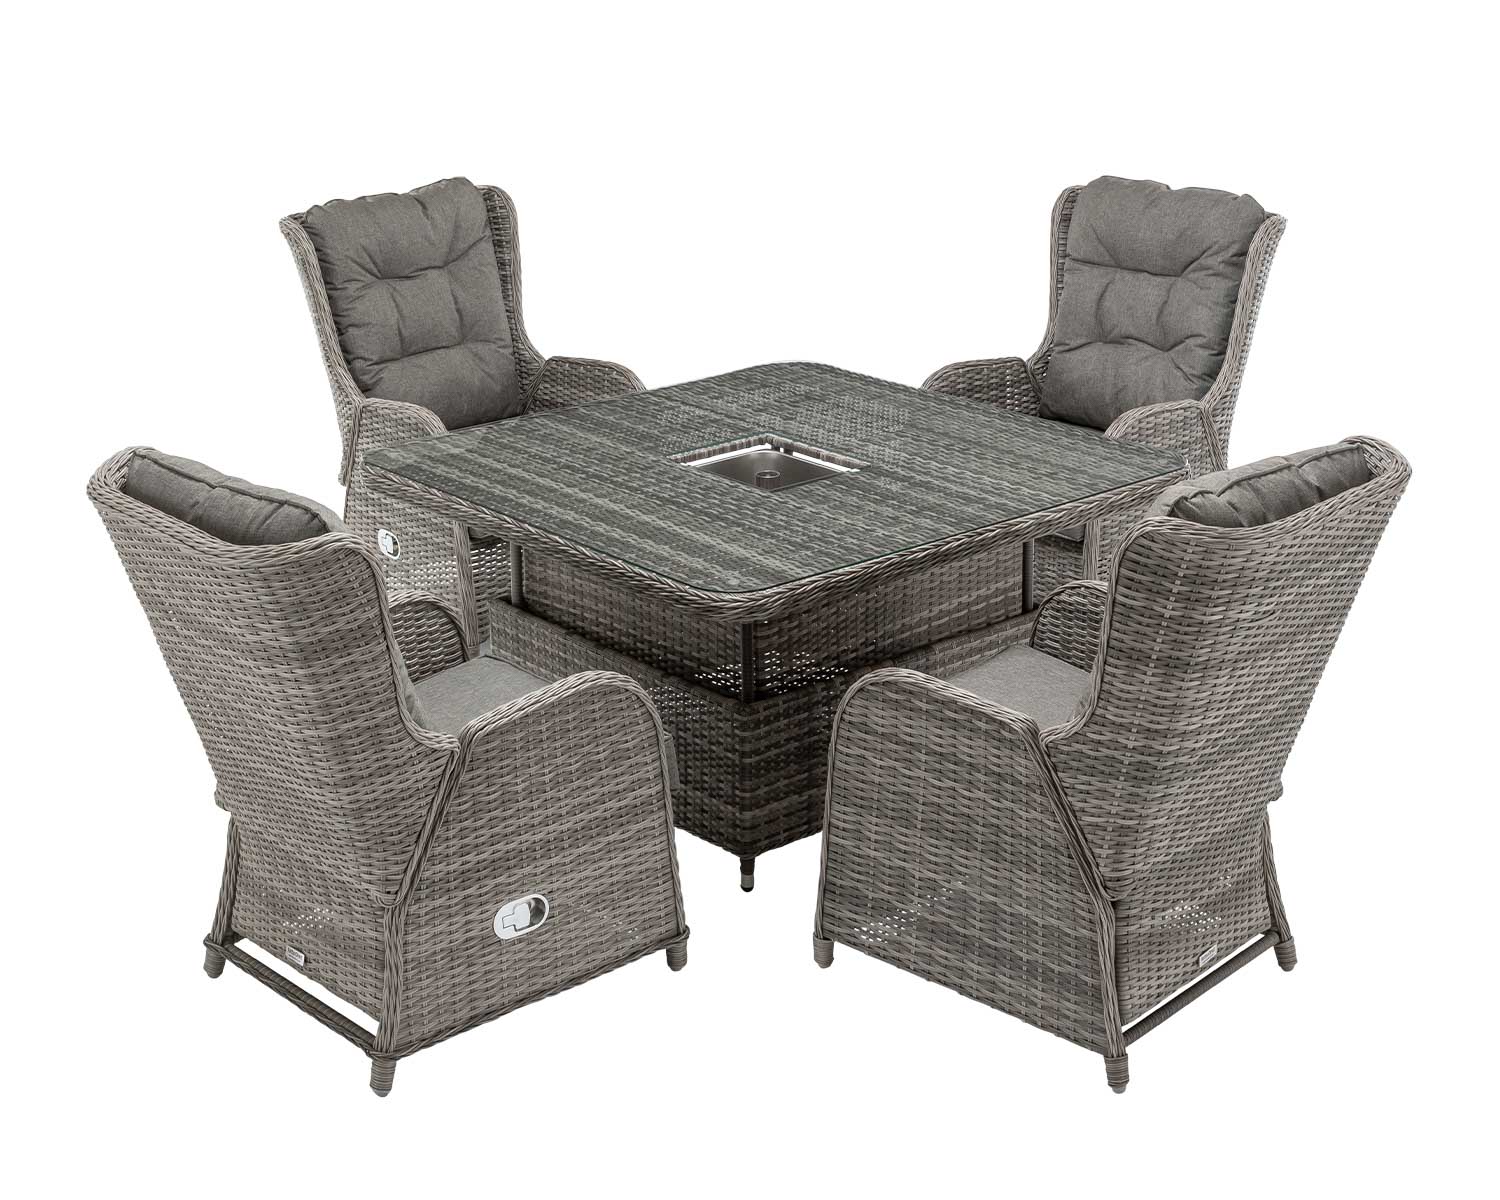 4 Reclining Rattan Garden Chairs Amp Square Ice Bucket Dining Table In Grey Fiji Rattan Direct